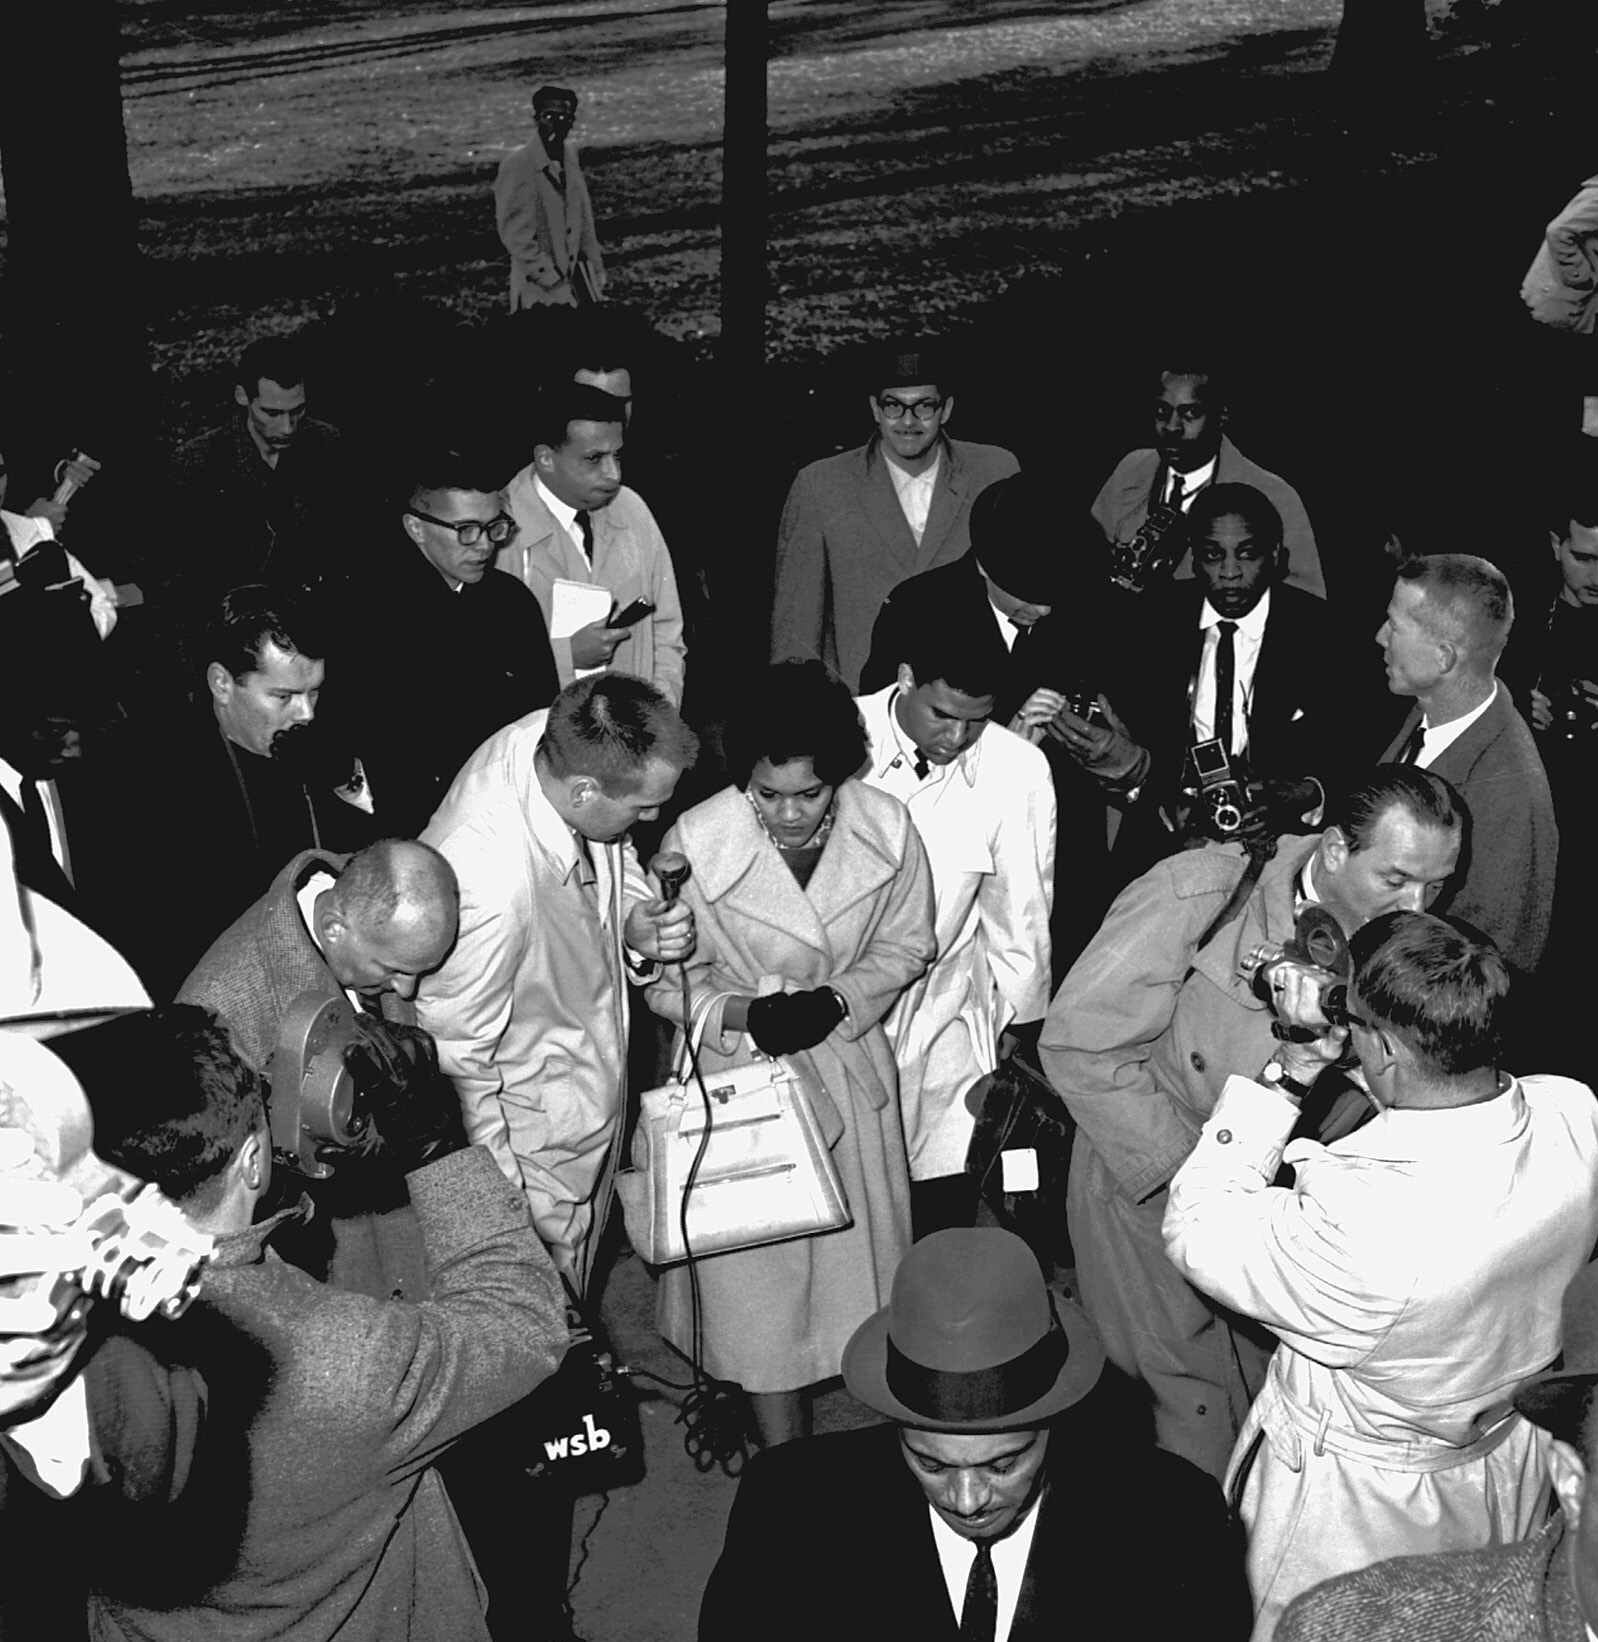 Charlayne Hunter, 18, and Hamilton Holmes, 19, center, have both been admitted to the University of Georgia under federal court order, are surrounded by newsmen as they arrive on the university campus in Athens, Ga., on Jan. 9, 1961. 